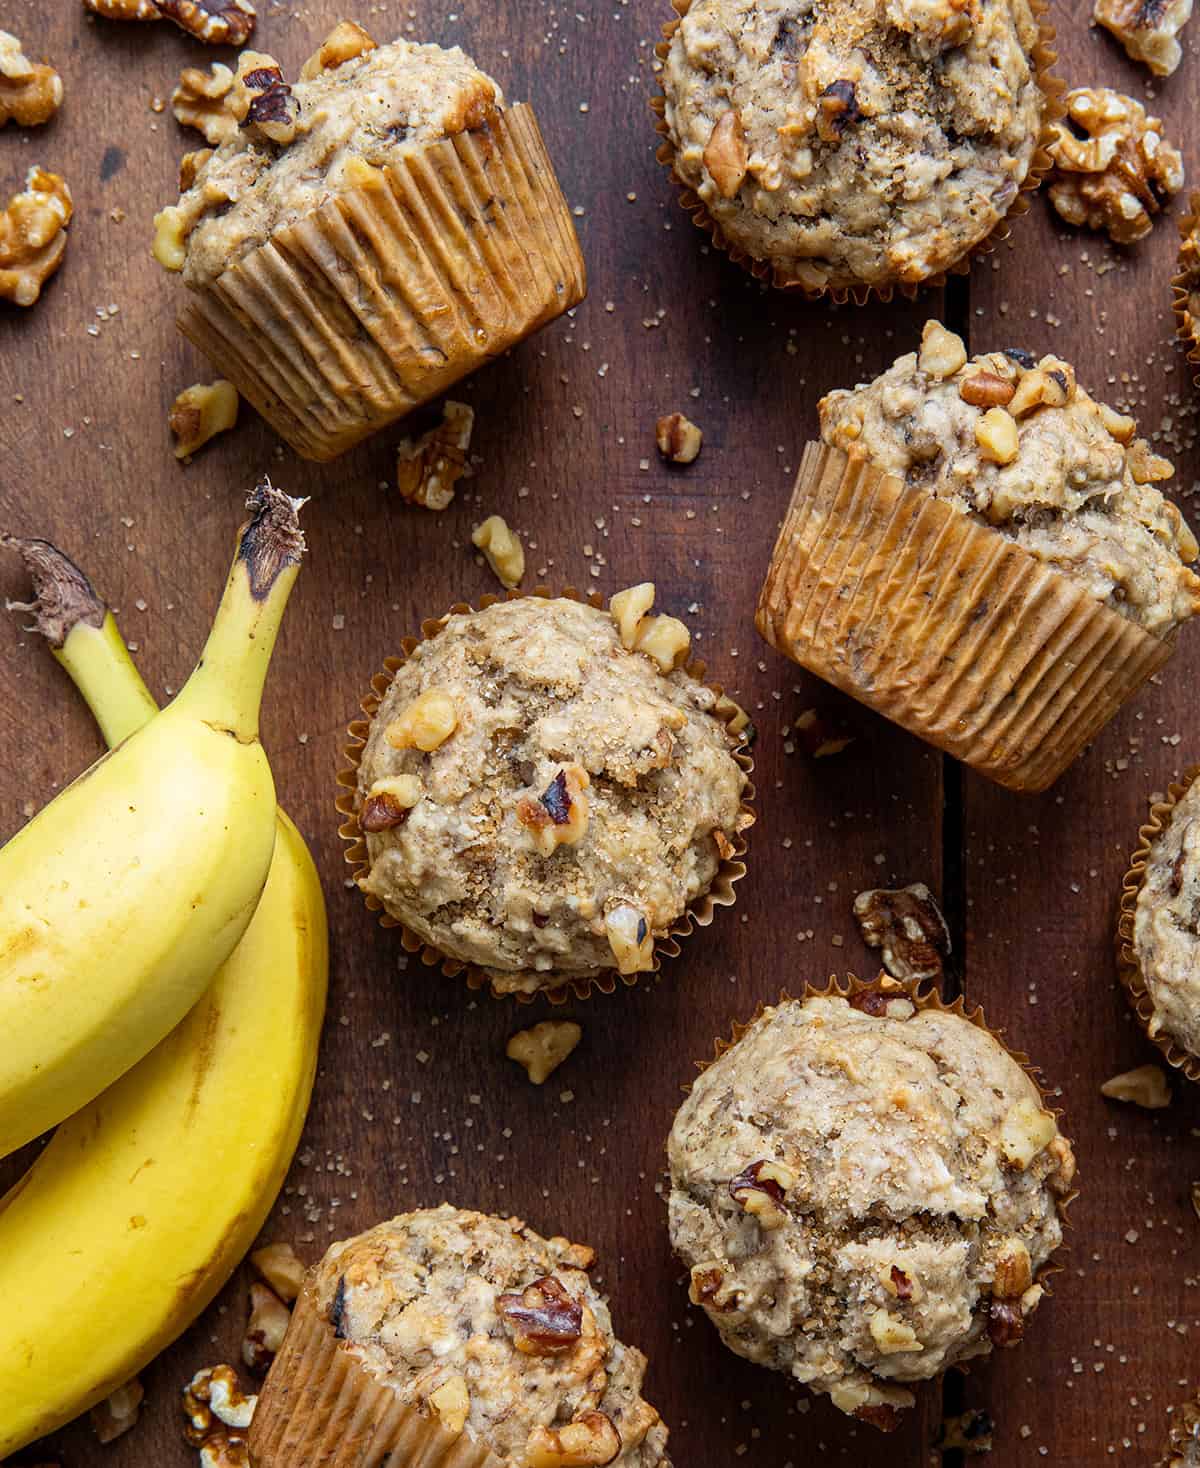 Banana Nut Muffins on a wooden table with bananas from overhead.